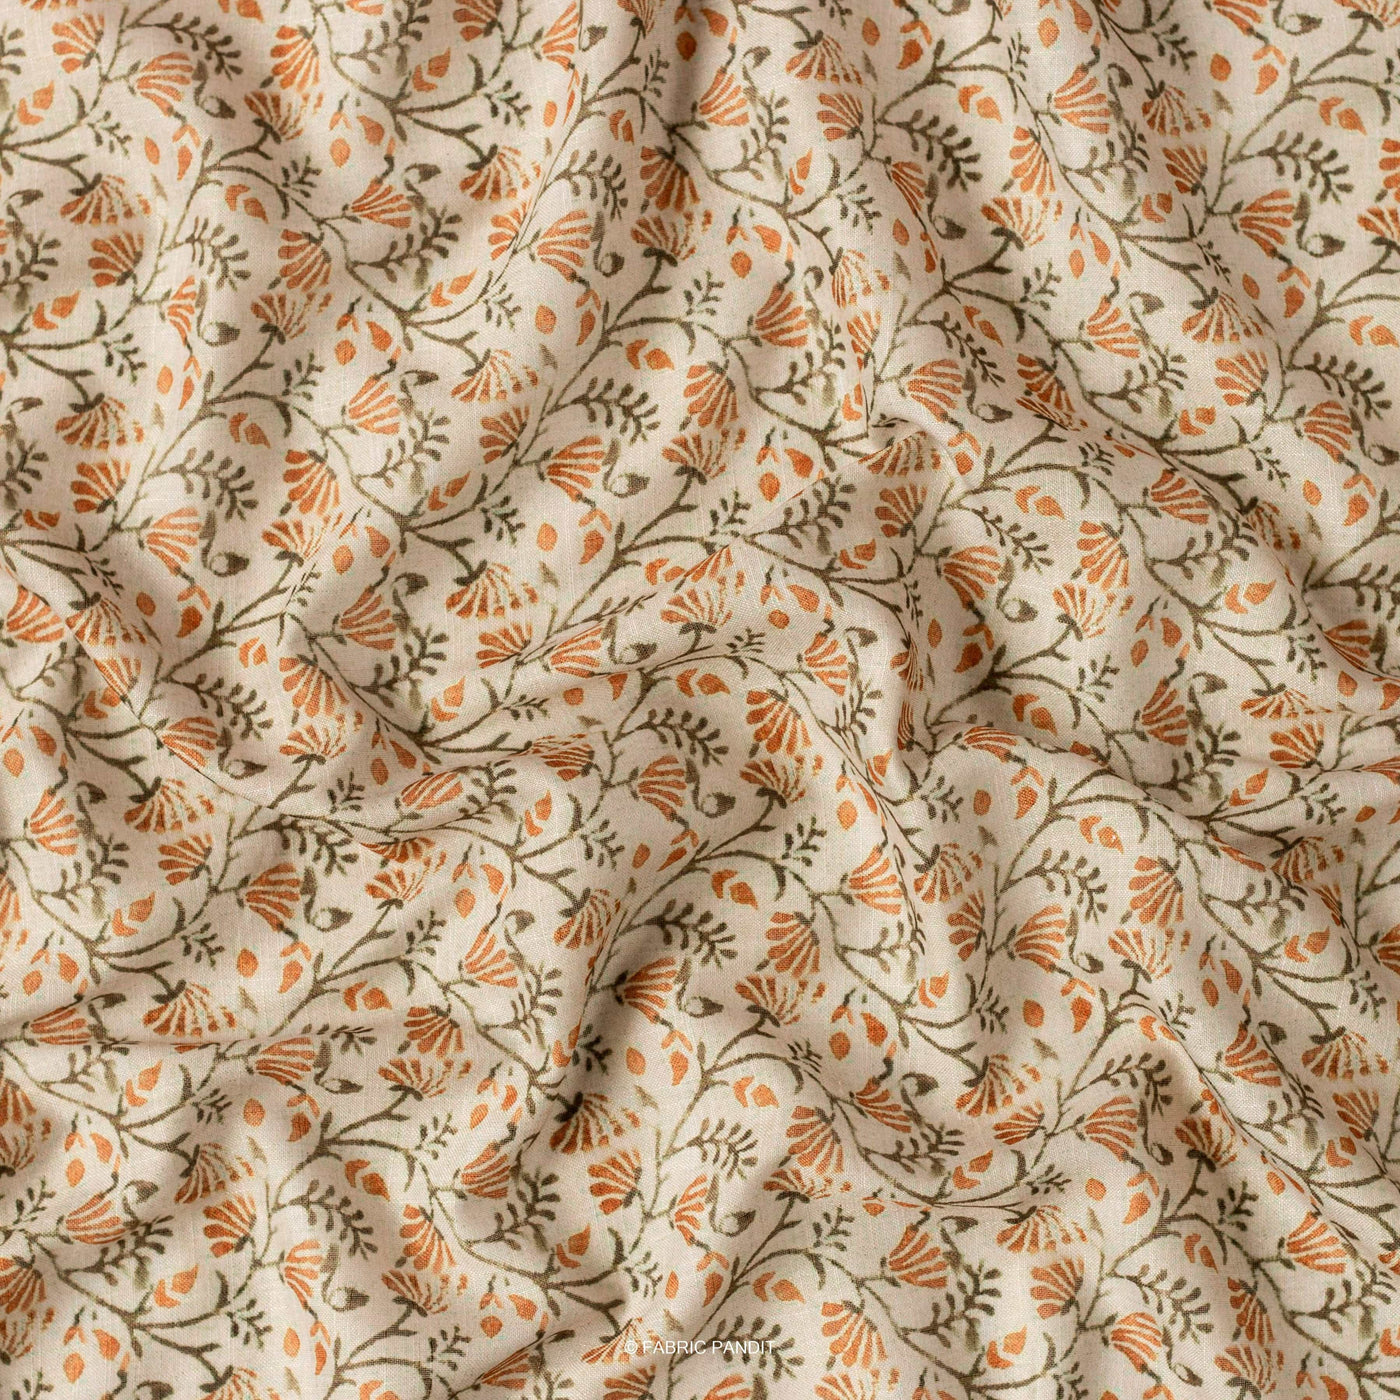 Fabric Pandit Fabric Orange And Khaki Continuous Floral Pattern Digital Printed Poly Linen Fabric (Width 44 Inches)